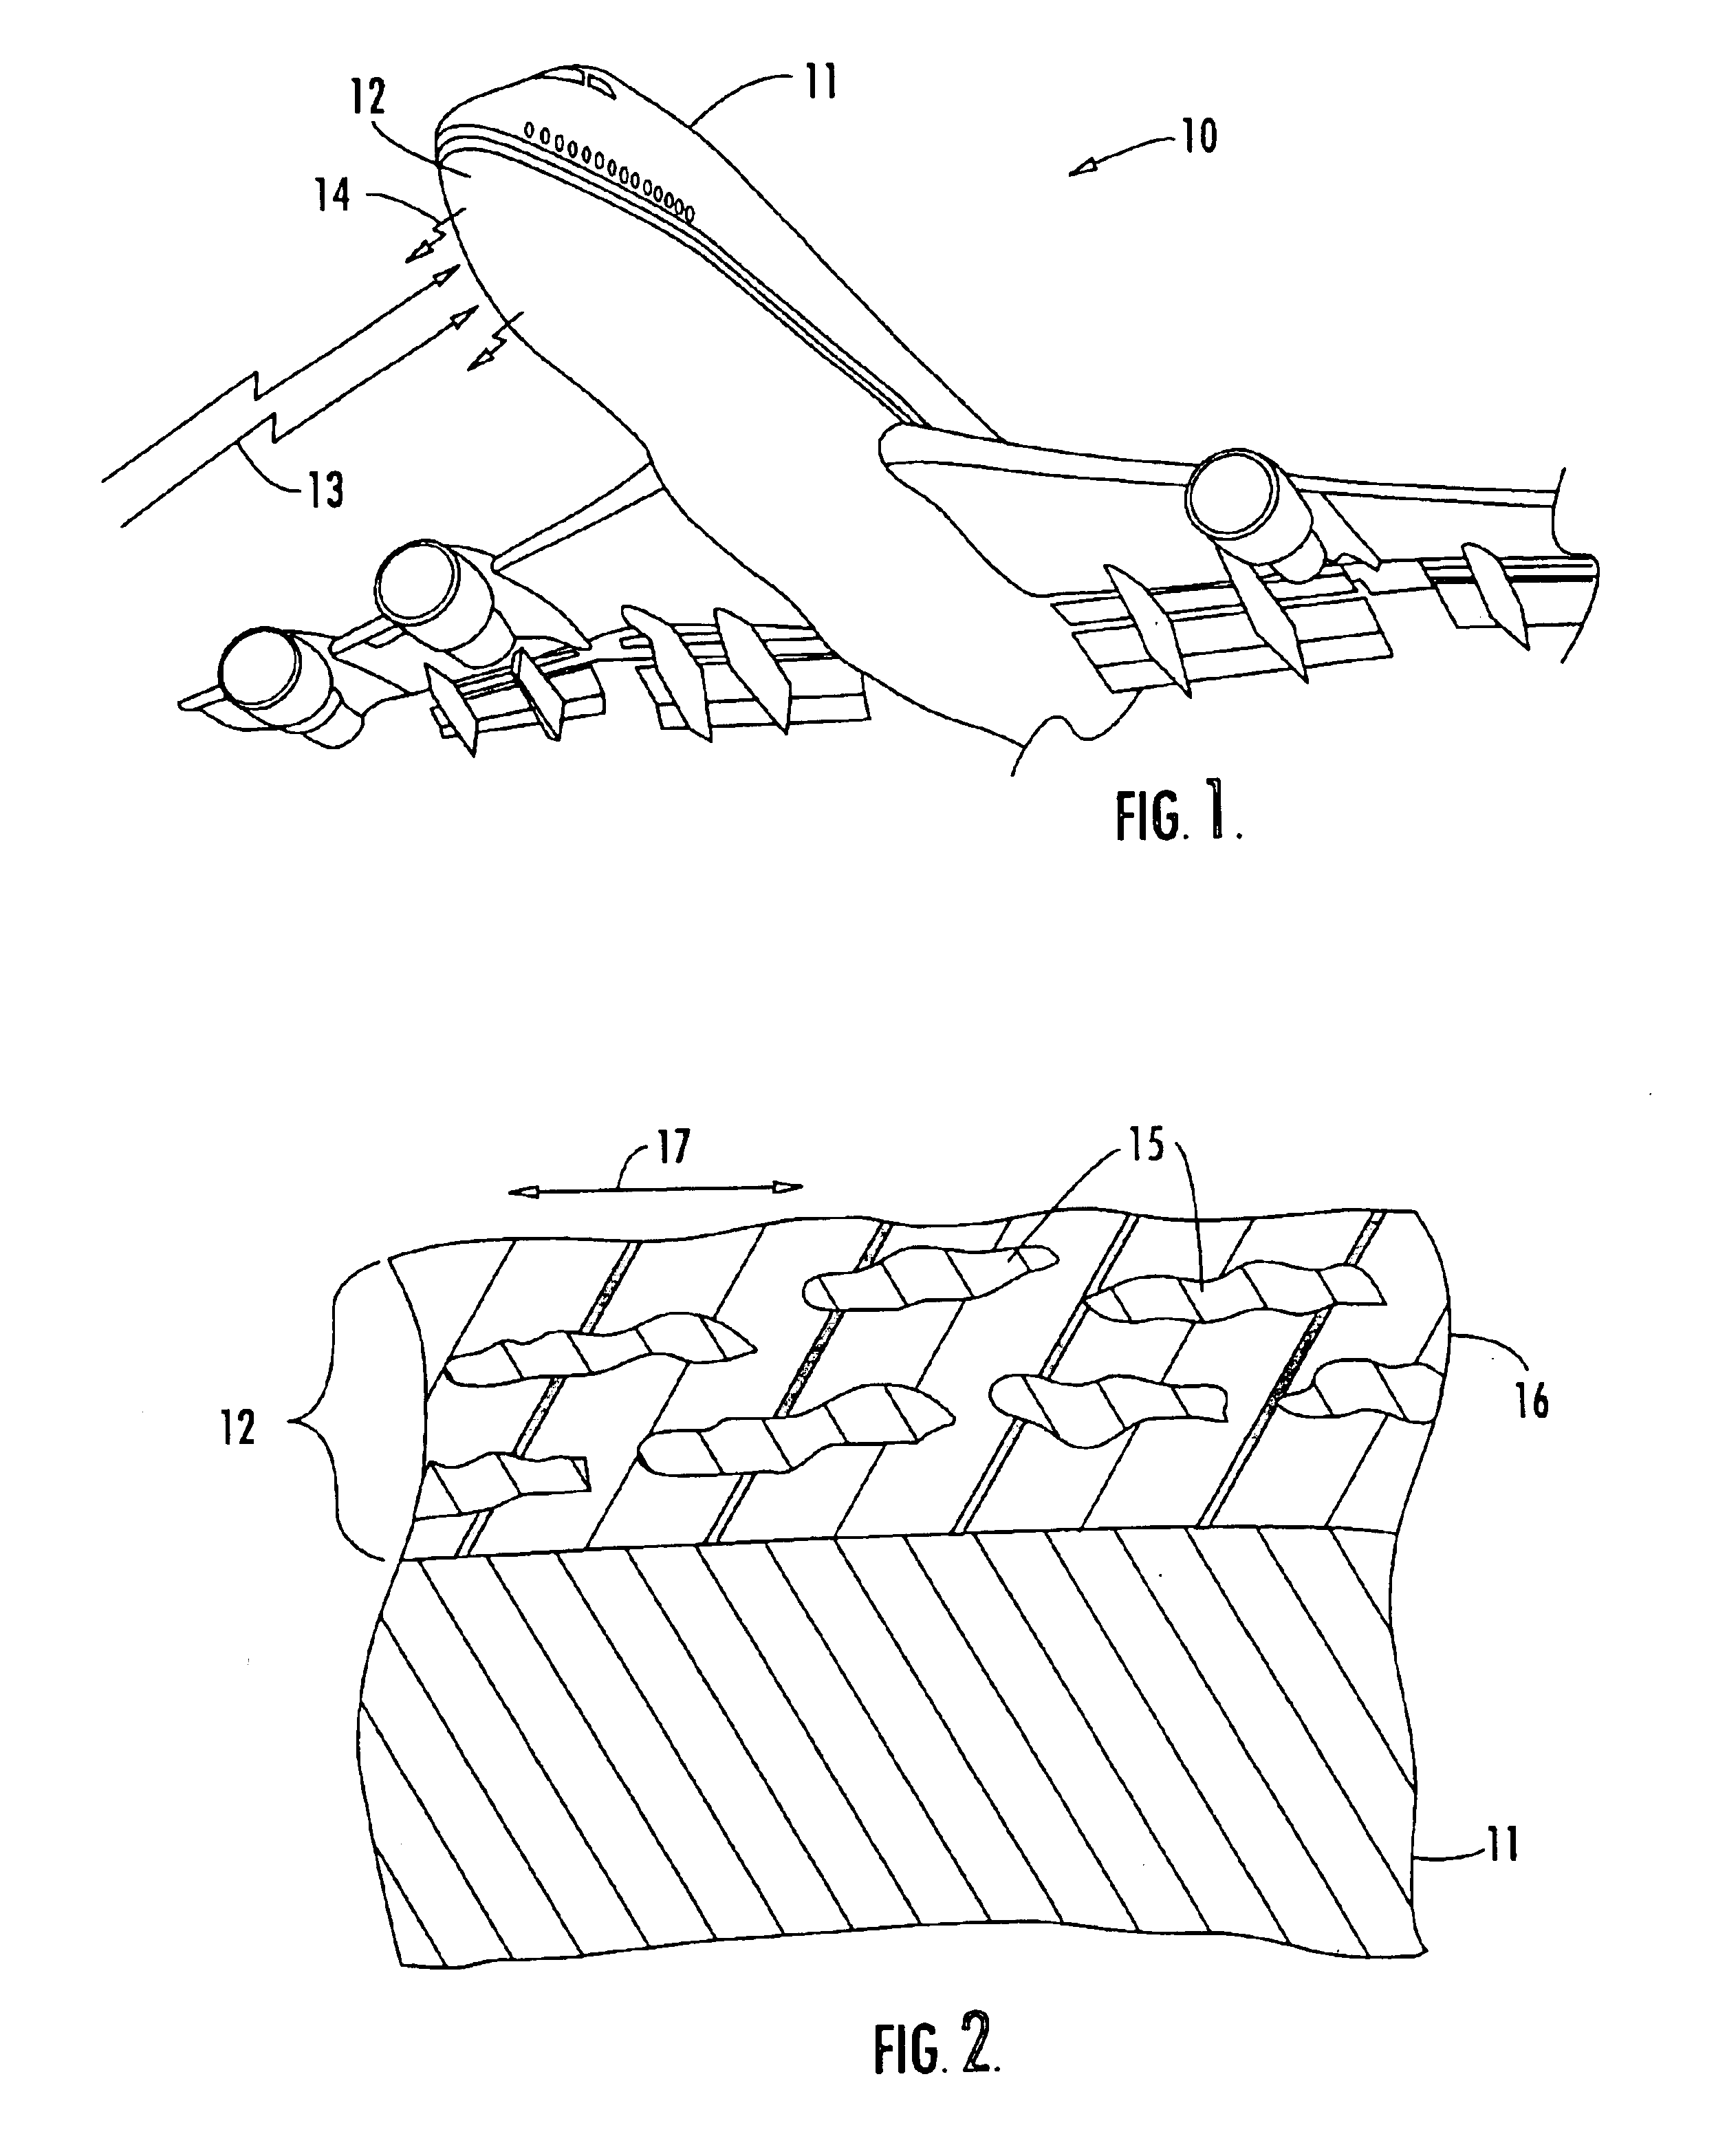 Method for making radiation absorbing material (RAM) and devices including same